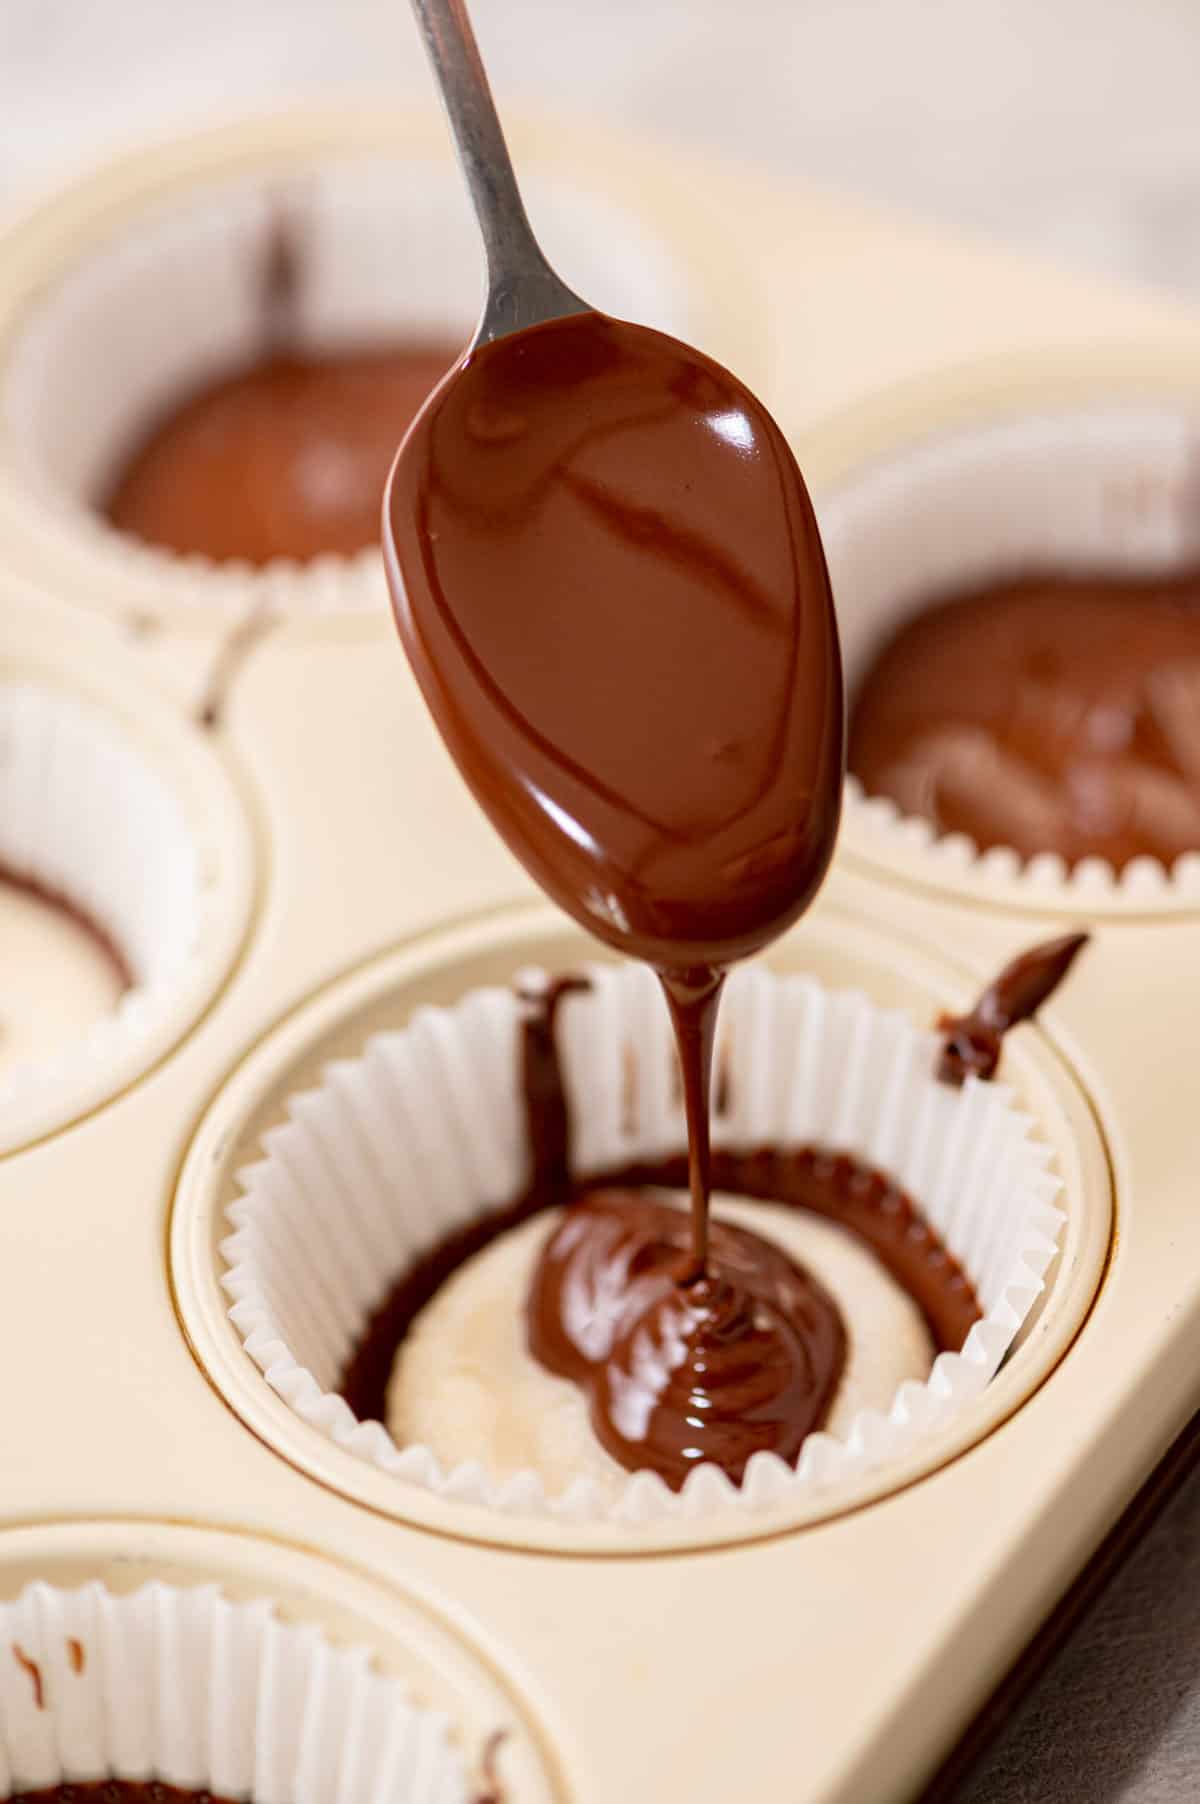 Drizzling chocolate to make coconut butter cups.